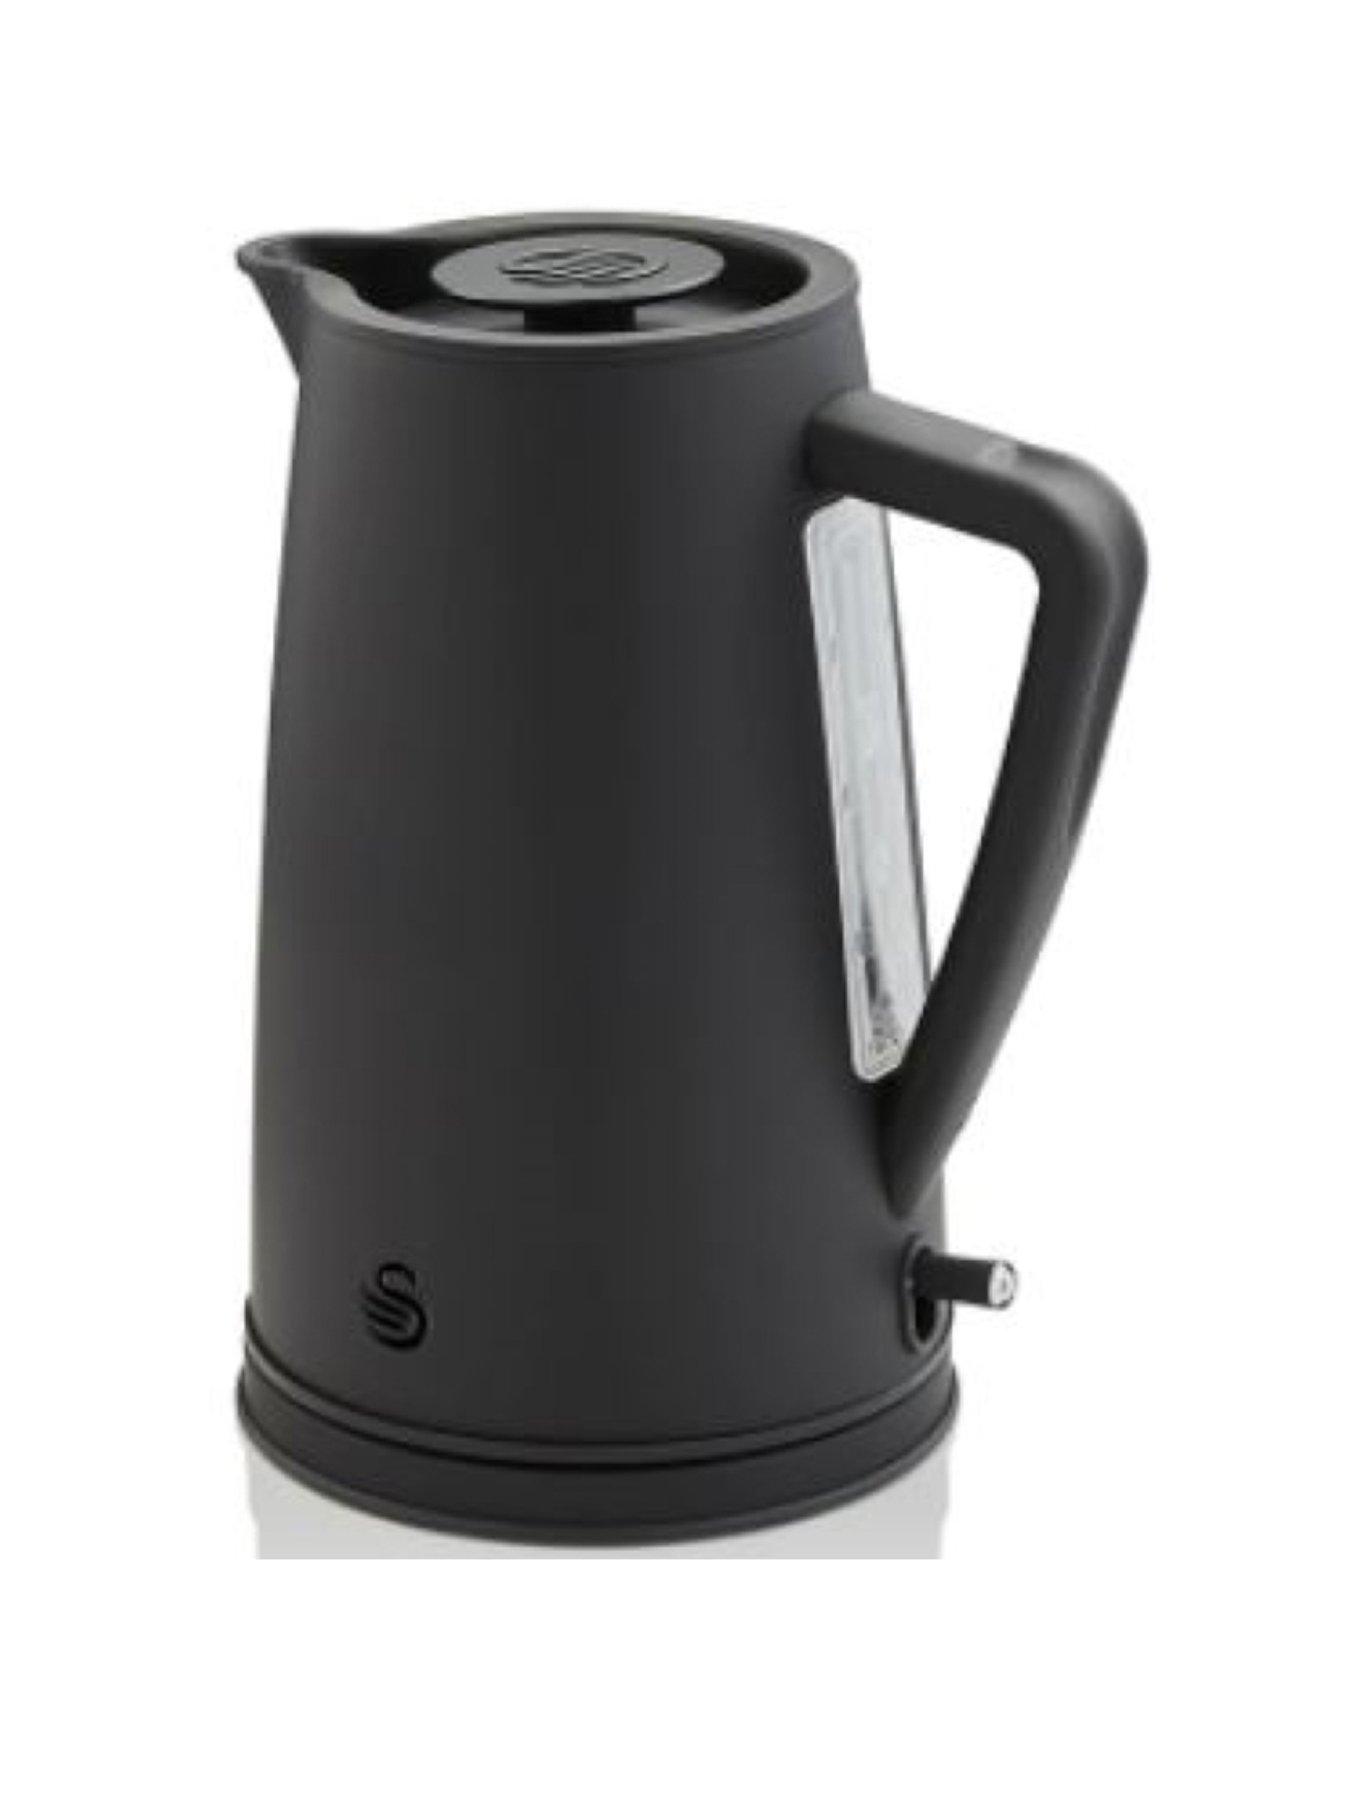 Breville The Soft Top Pure Water kettle BKE700BSS 1.7LT Stainless